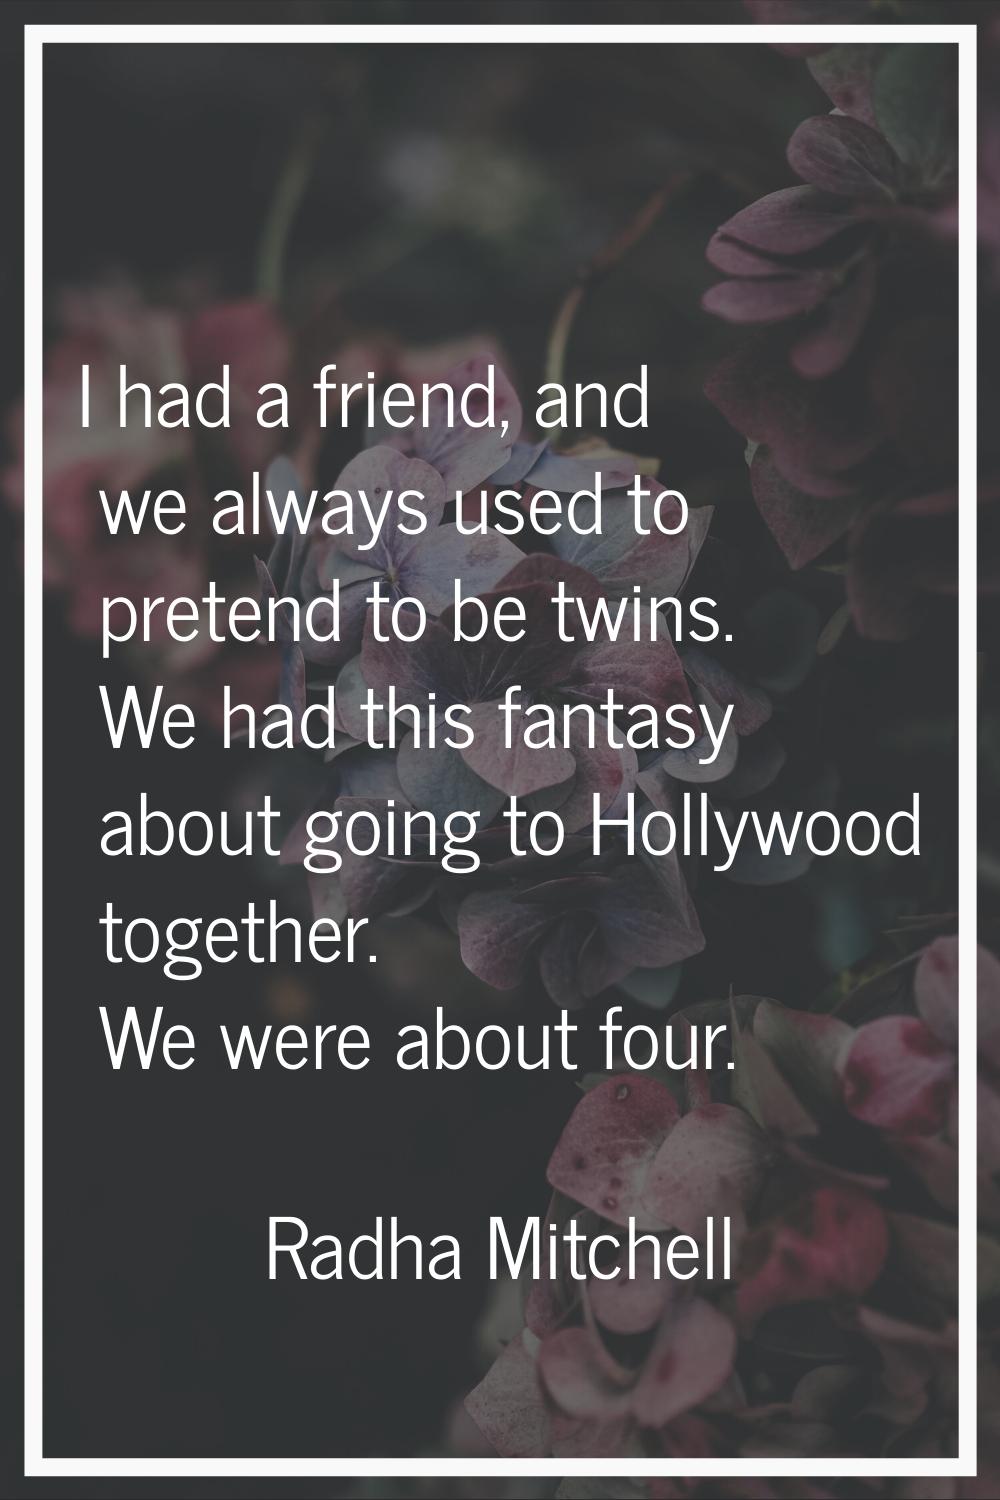 I had a friend, and we always used to pretend to be twins. We had this fantasy about going to Holly